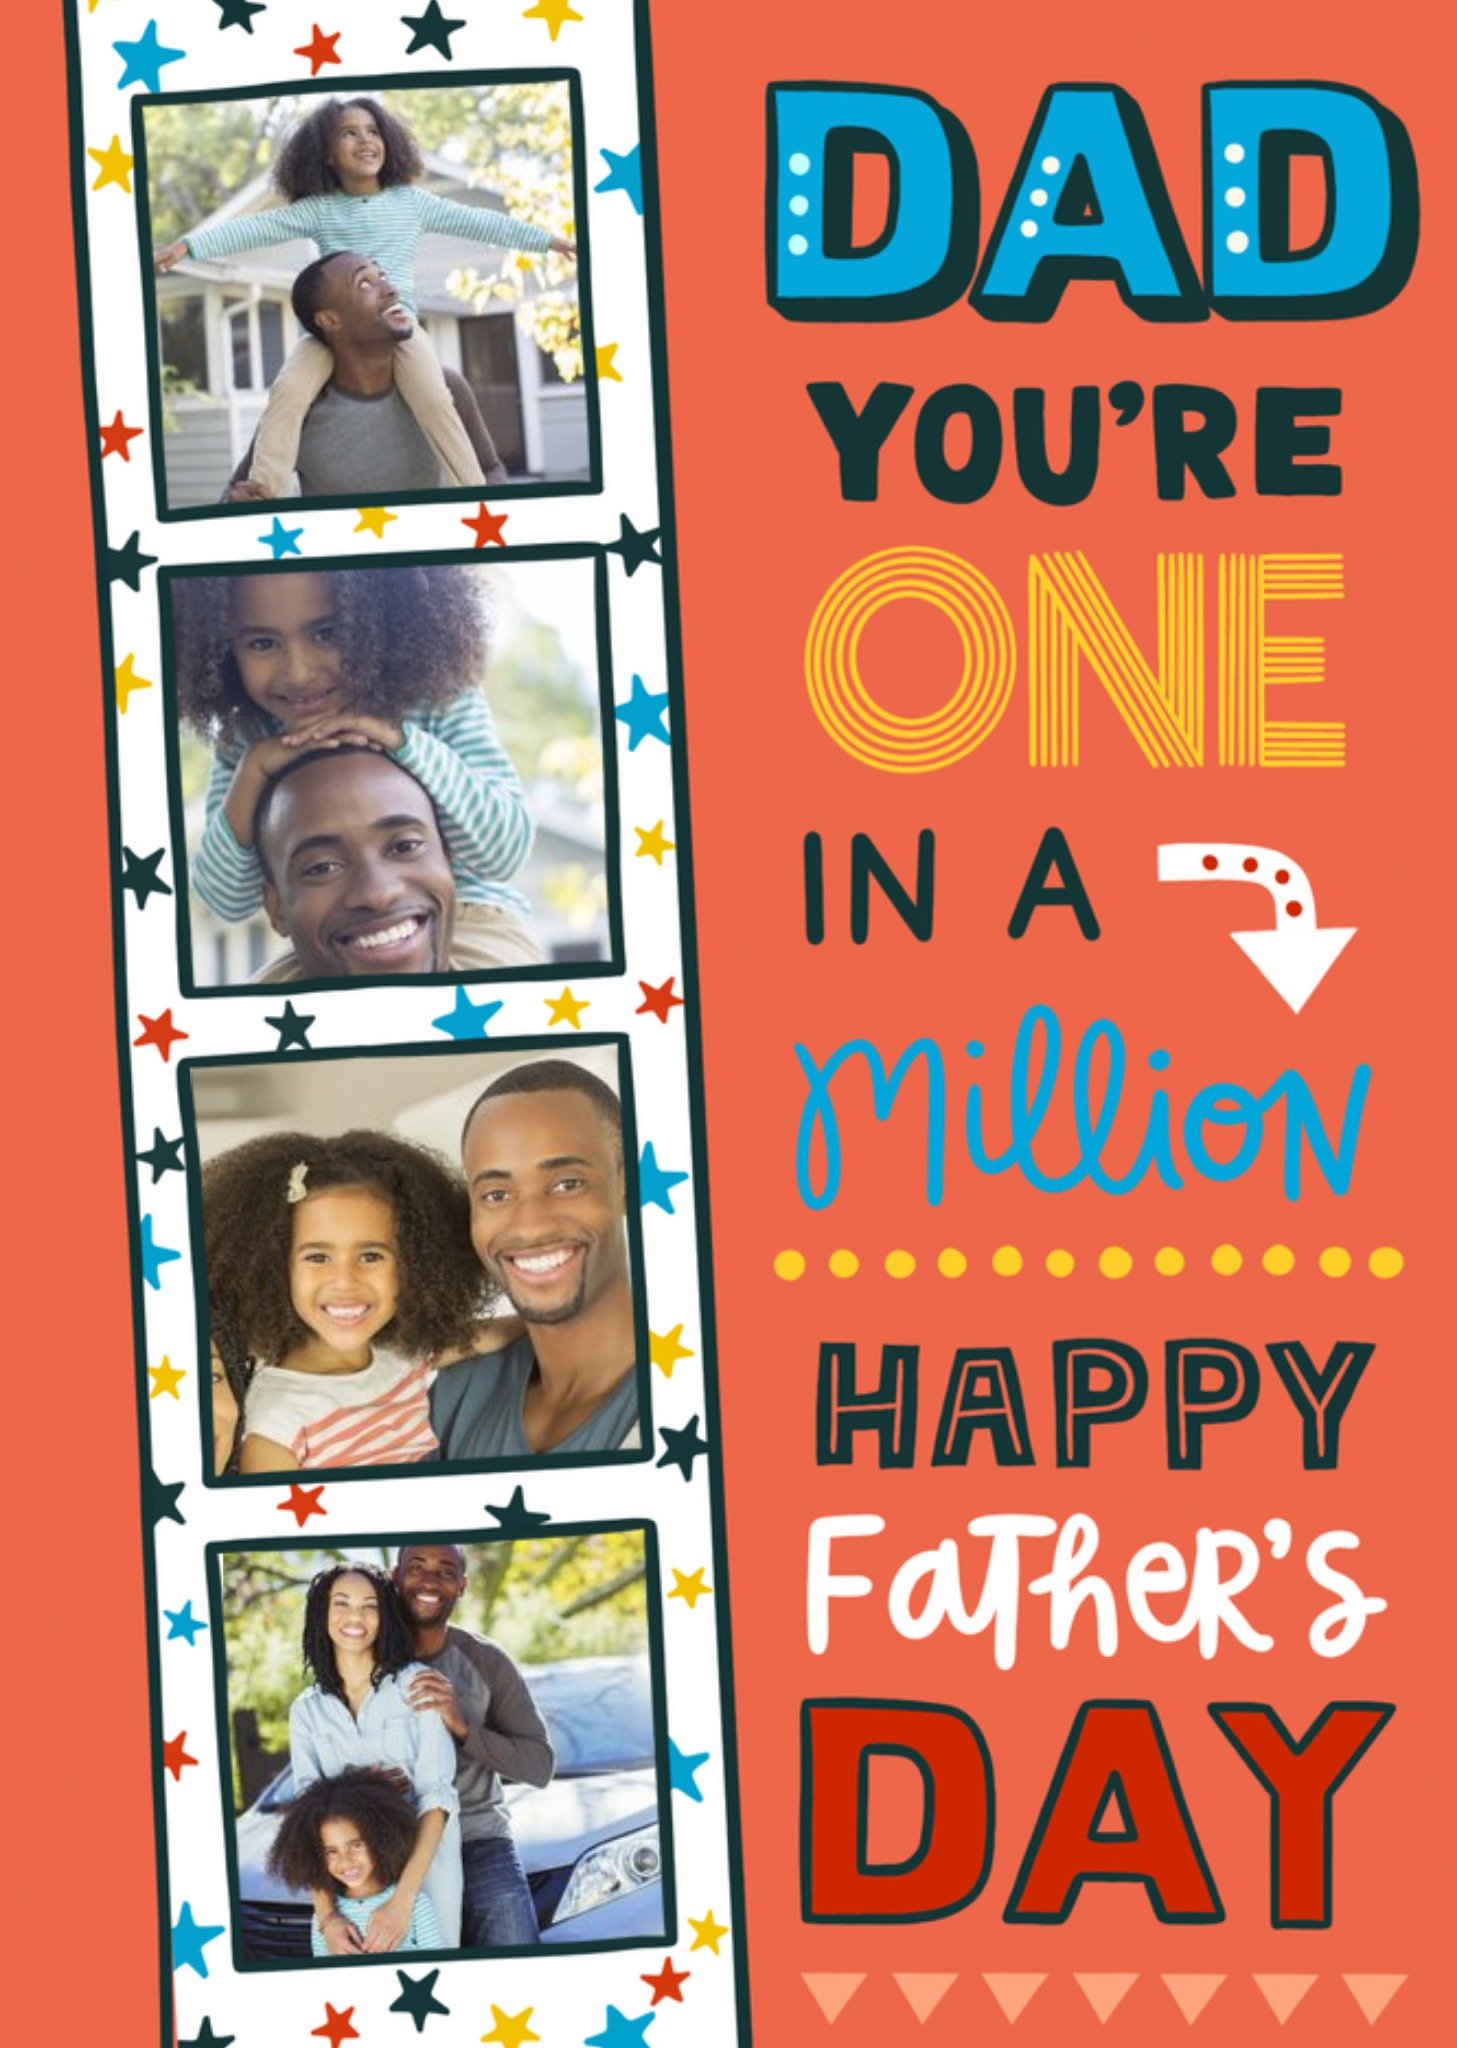 Moonpig Typographic Dad Youre One In A Million Happy Fathers Day Card Ecard